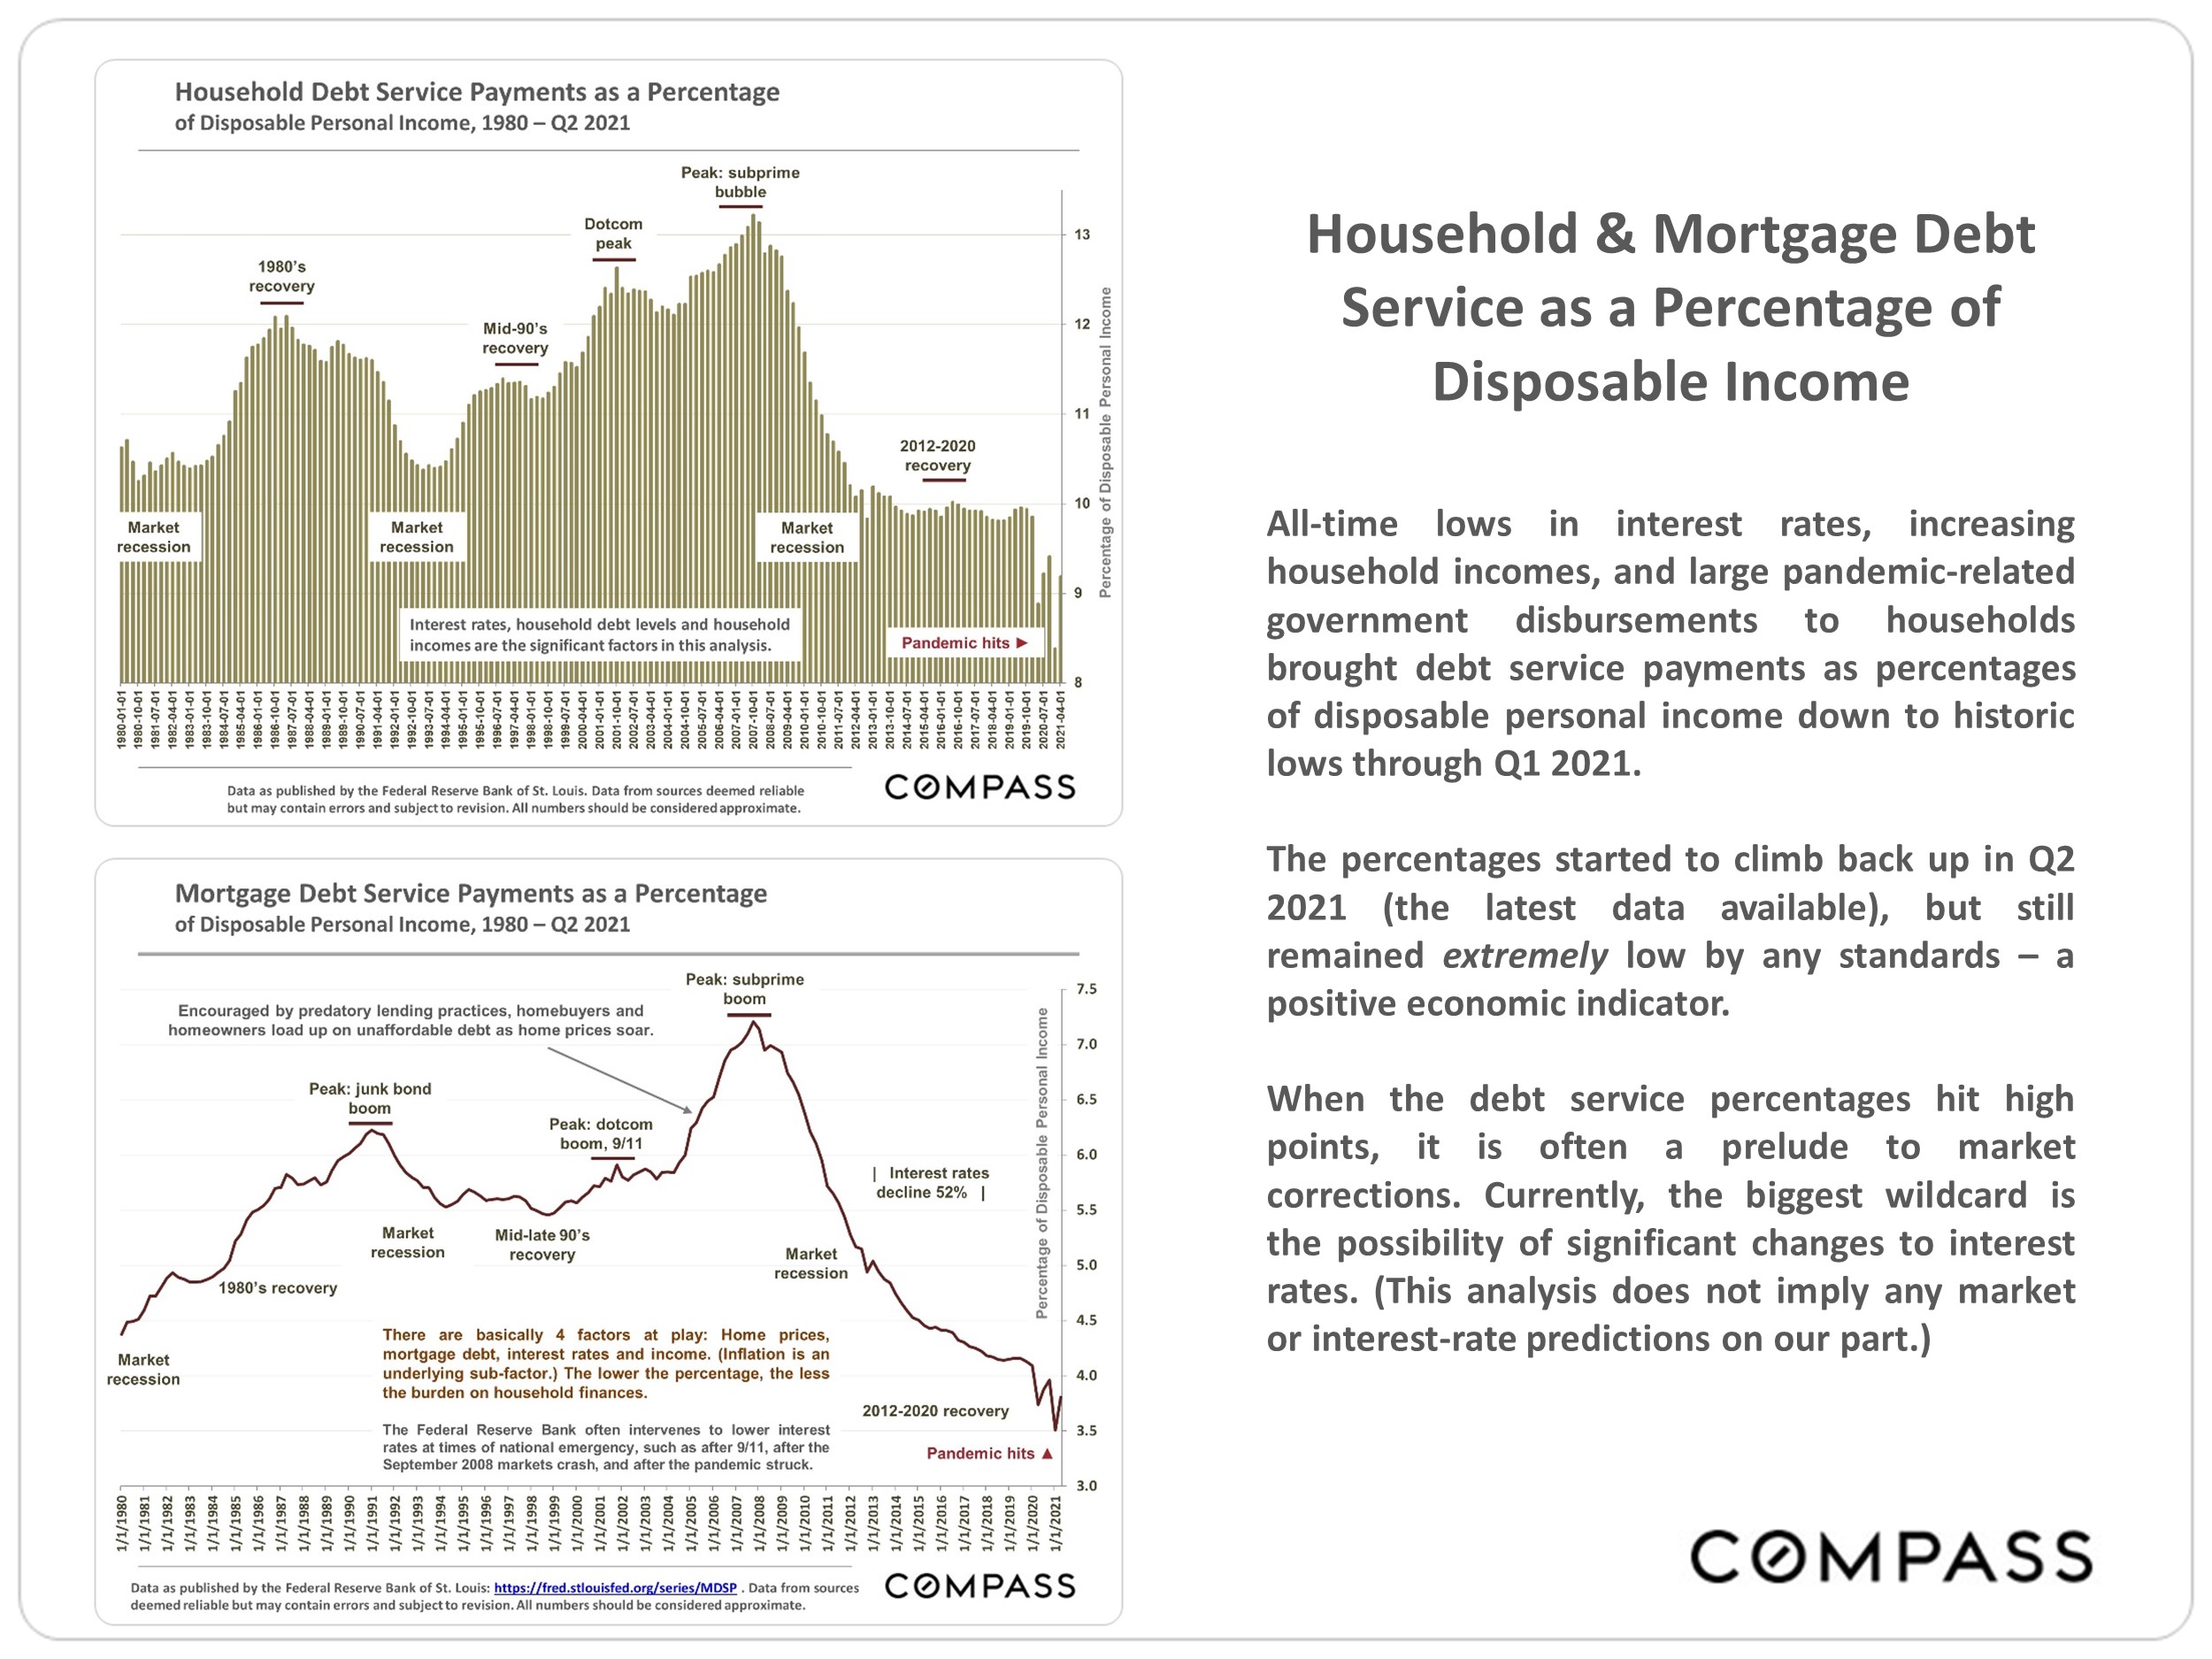 text discussing the household & mortgage debt service as a percentage of disposable income, with a graph of the household debt service payments as a percentage of disposable income and a graph of the mortgage debt service payments as a percentage of disposable income